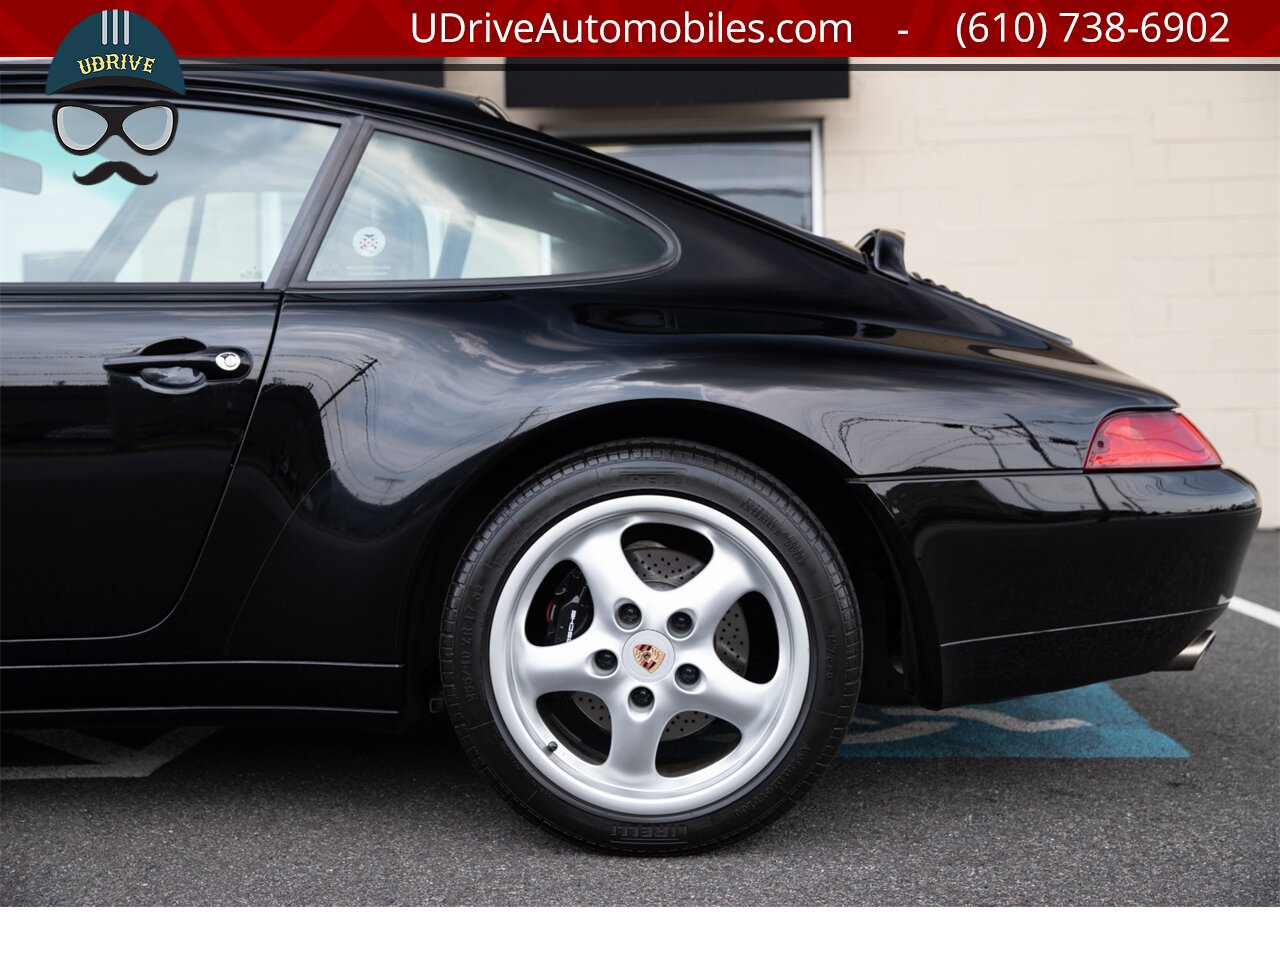 1995 Porsche 911 993 Carrera 6 Speed 16k Miles Service History  Black over Black Spectacular Stock Example 1 Owner Clean Carfax - Photo 22 - West Chester, PA 19382